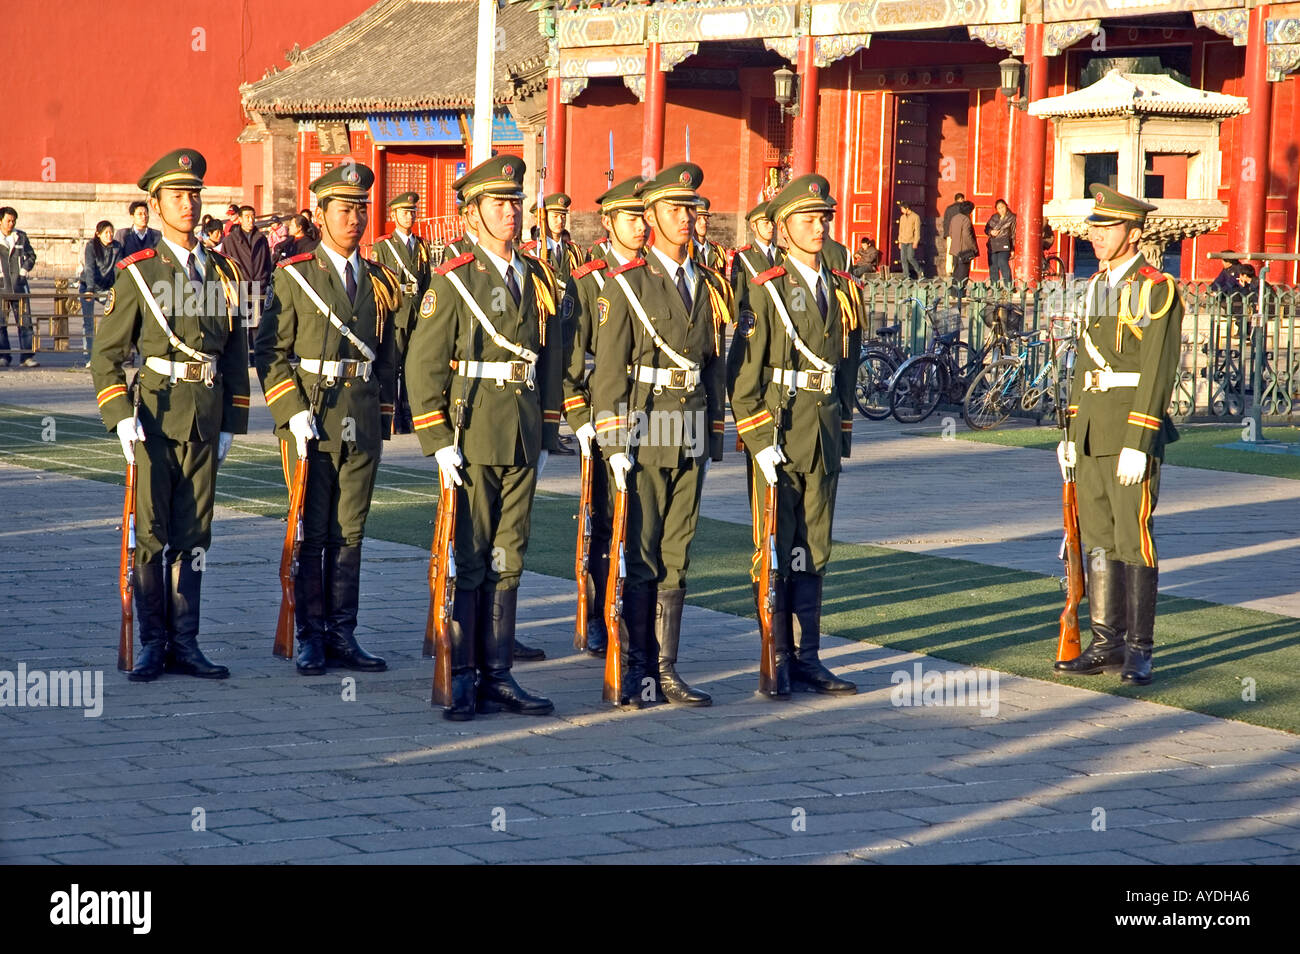 Soldiers practising military marching near Beijing’s Forbidden City and Tiananmen square, China Stock Photo